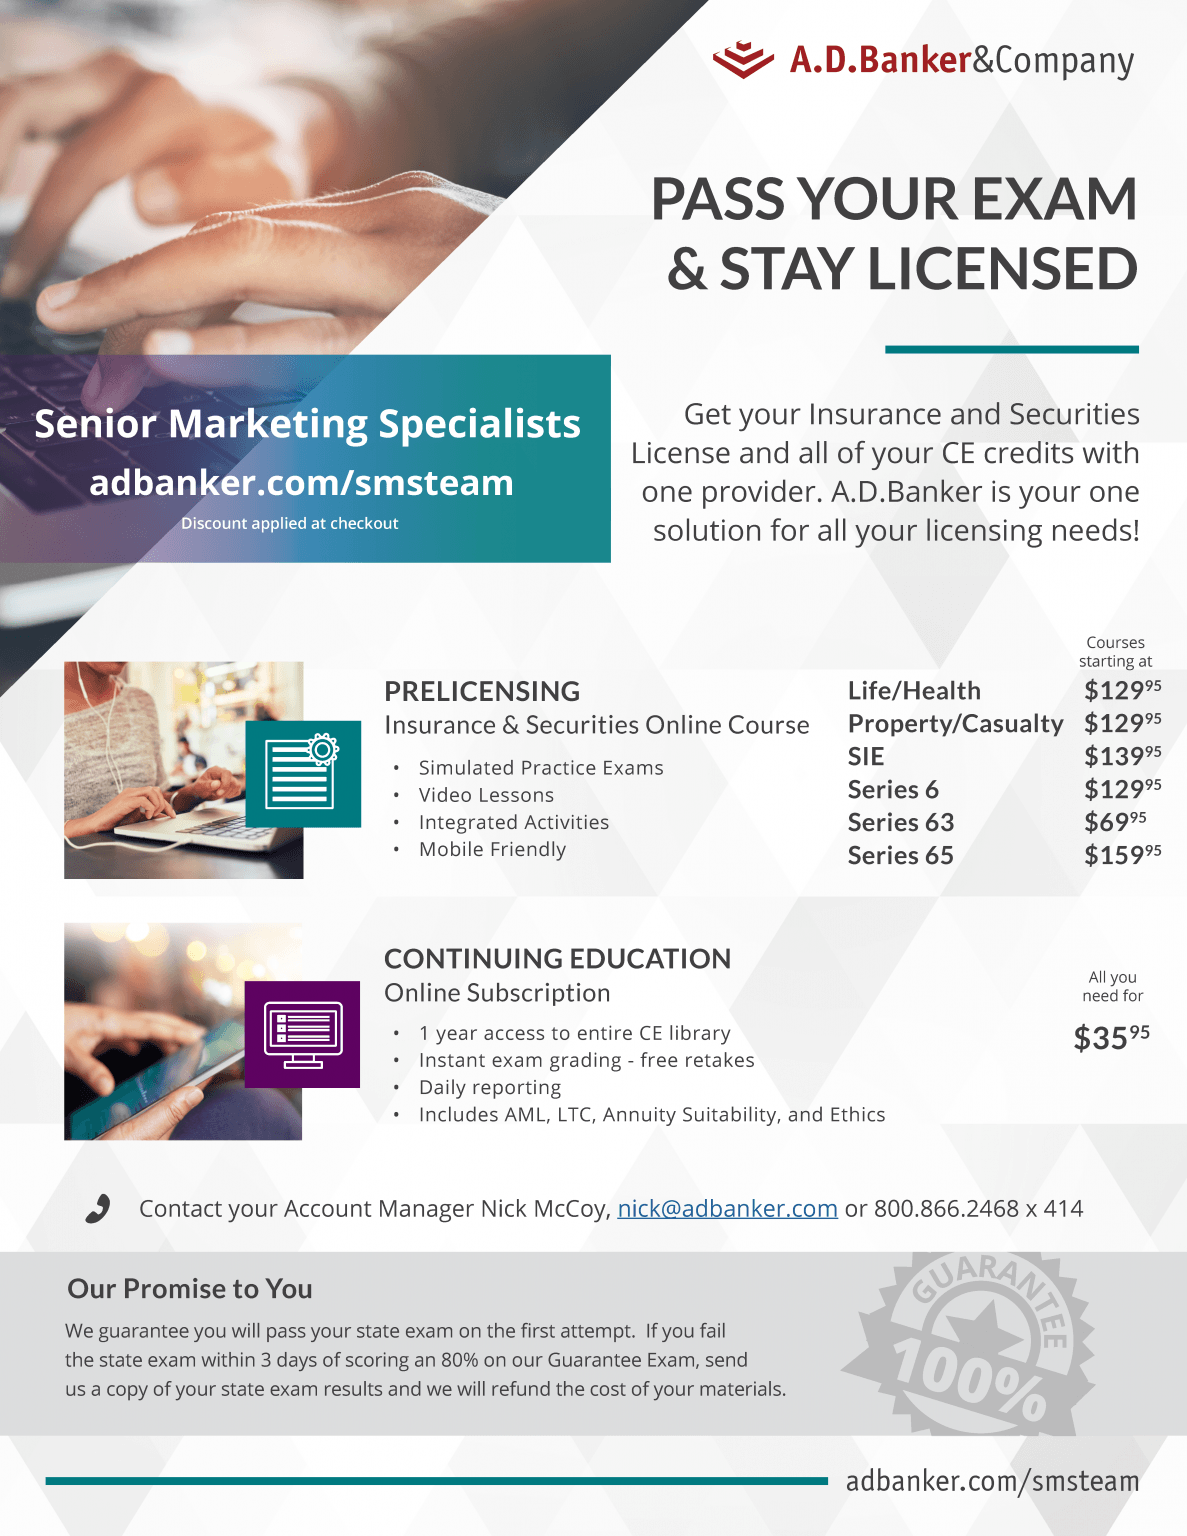 Ad Banker Licensing & Continuing Education Senior Marketing Specialists